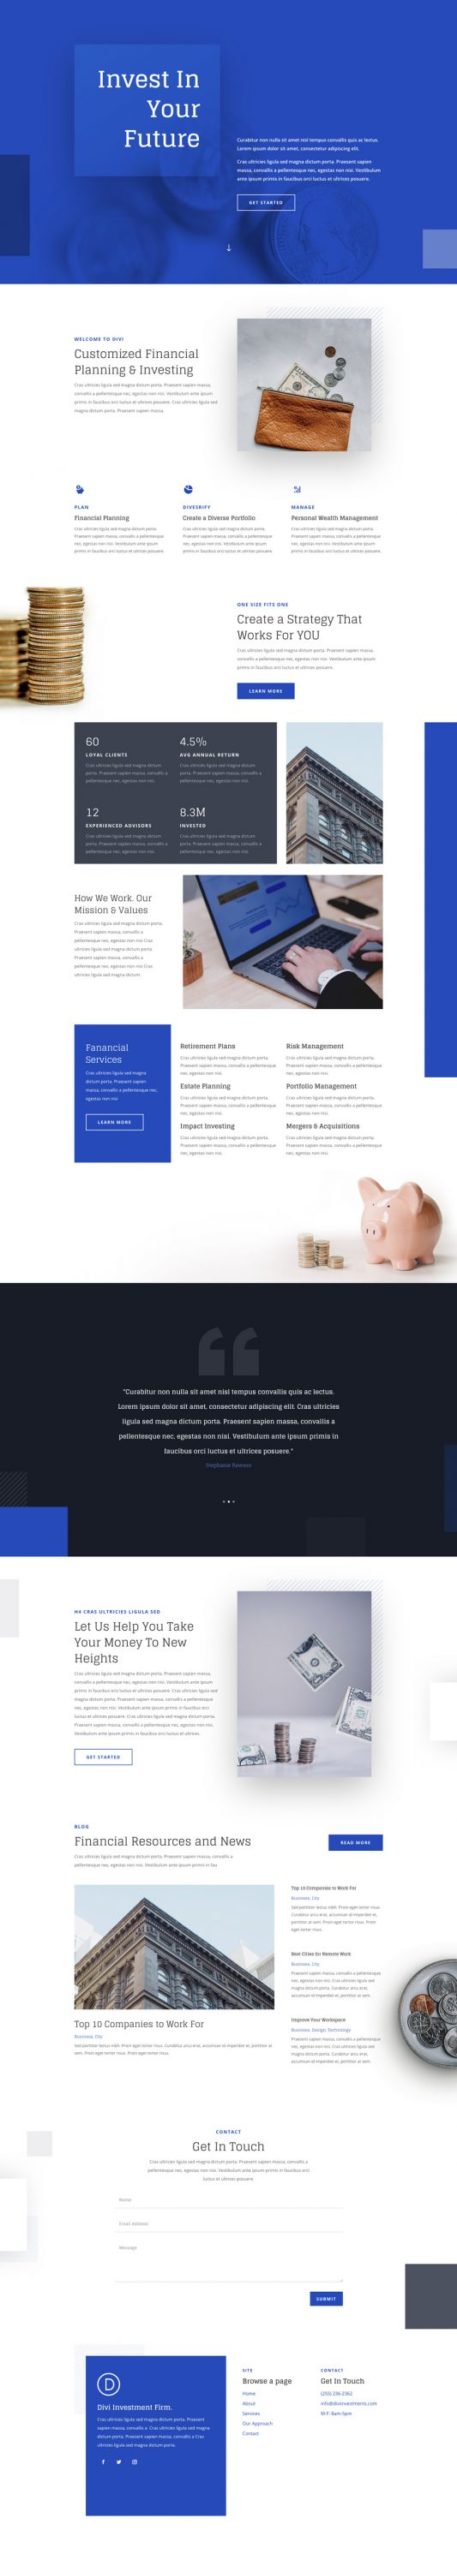 Investment Company Landing Page